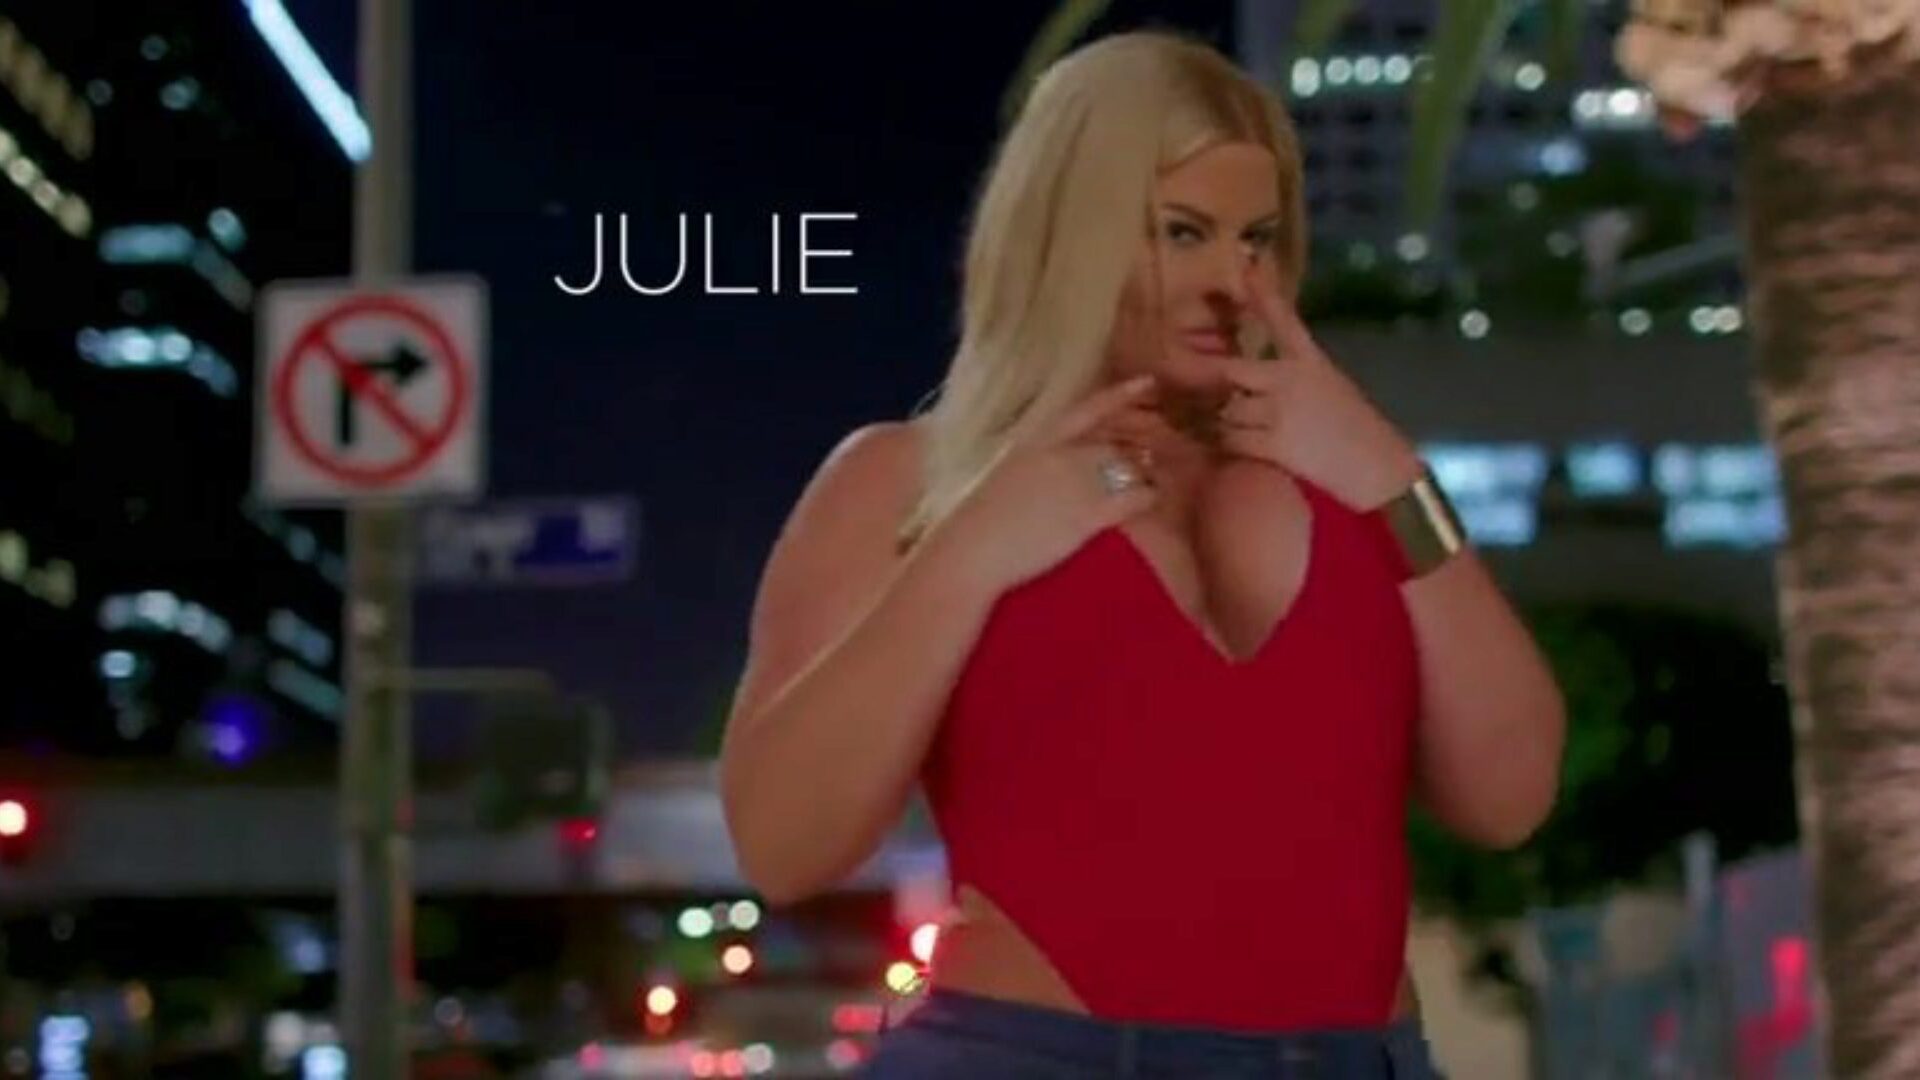 Ms. Thicc a.k.a. Julie Specie got RawDogged If u say Butt-Gazoo-Cheeeeks! three Times in a mirror then Julie Money will abruptly flash up and be highly angry cause you made her emerge in Azerbaijan.